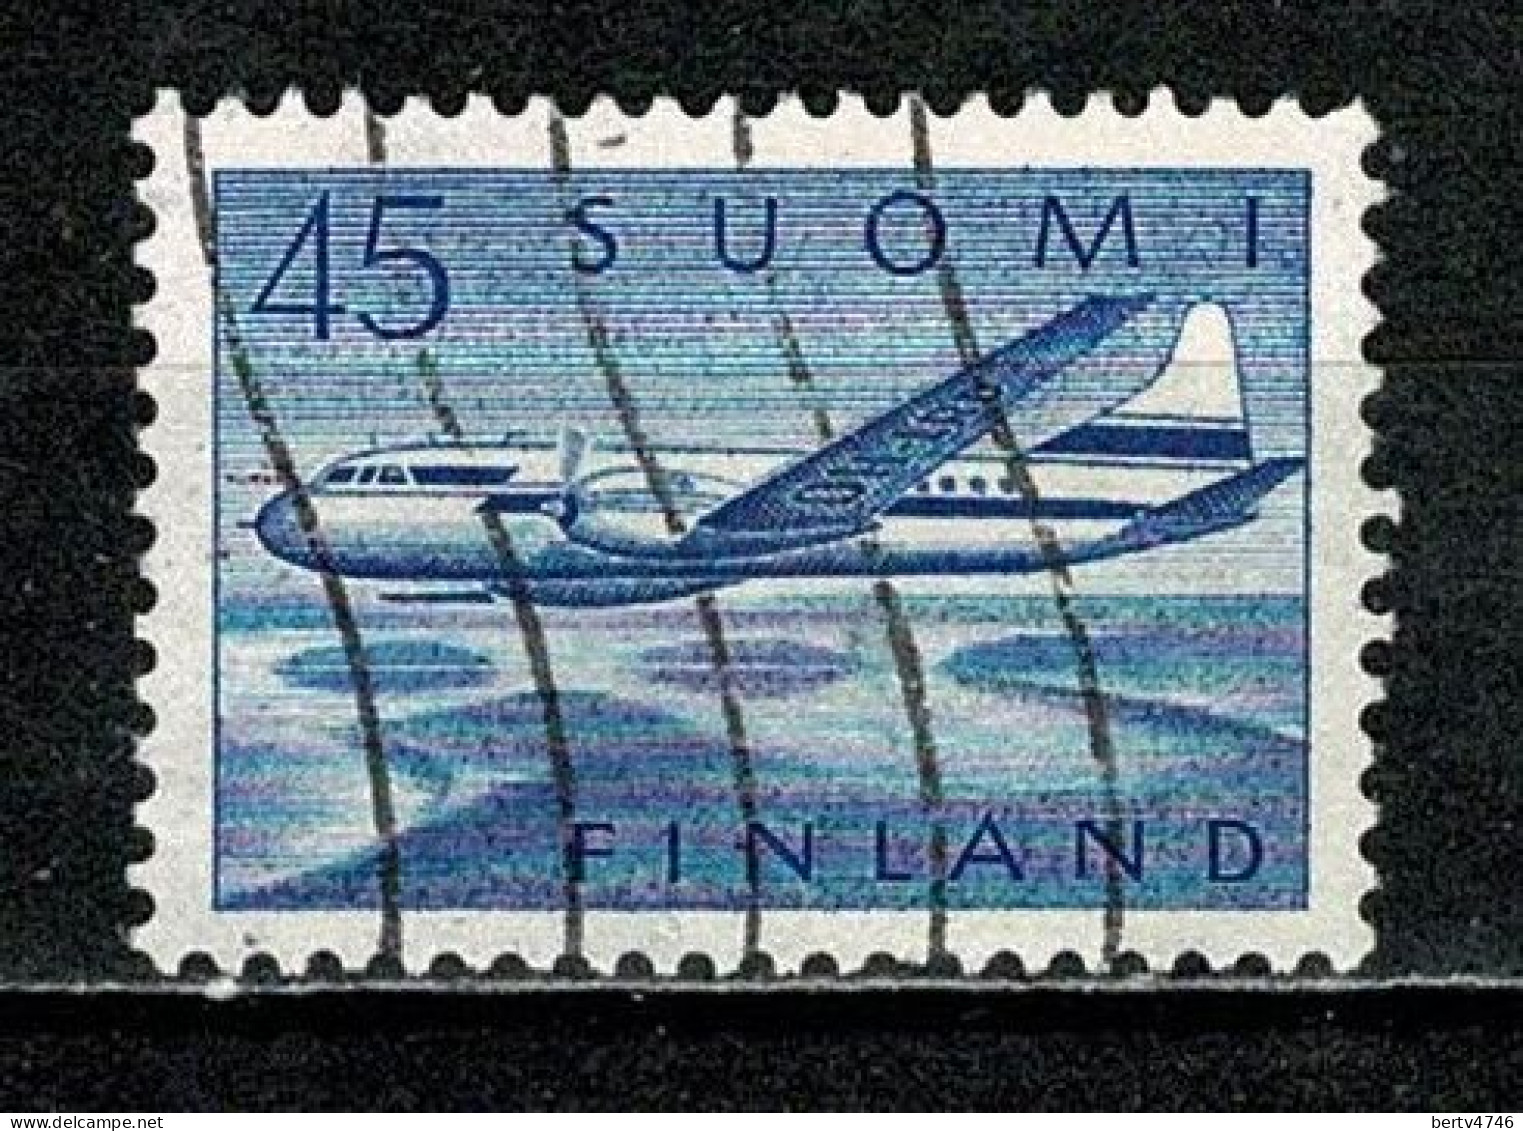 Finland 1958/1959 Yv. LP / PA  6,  (o) Used / Obl / Gebr - Used Stamps